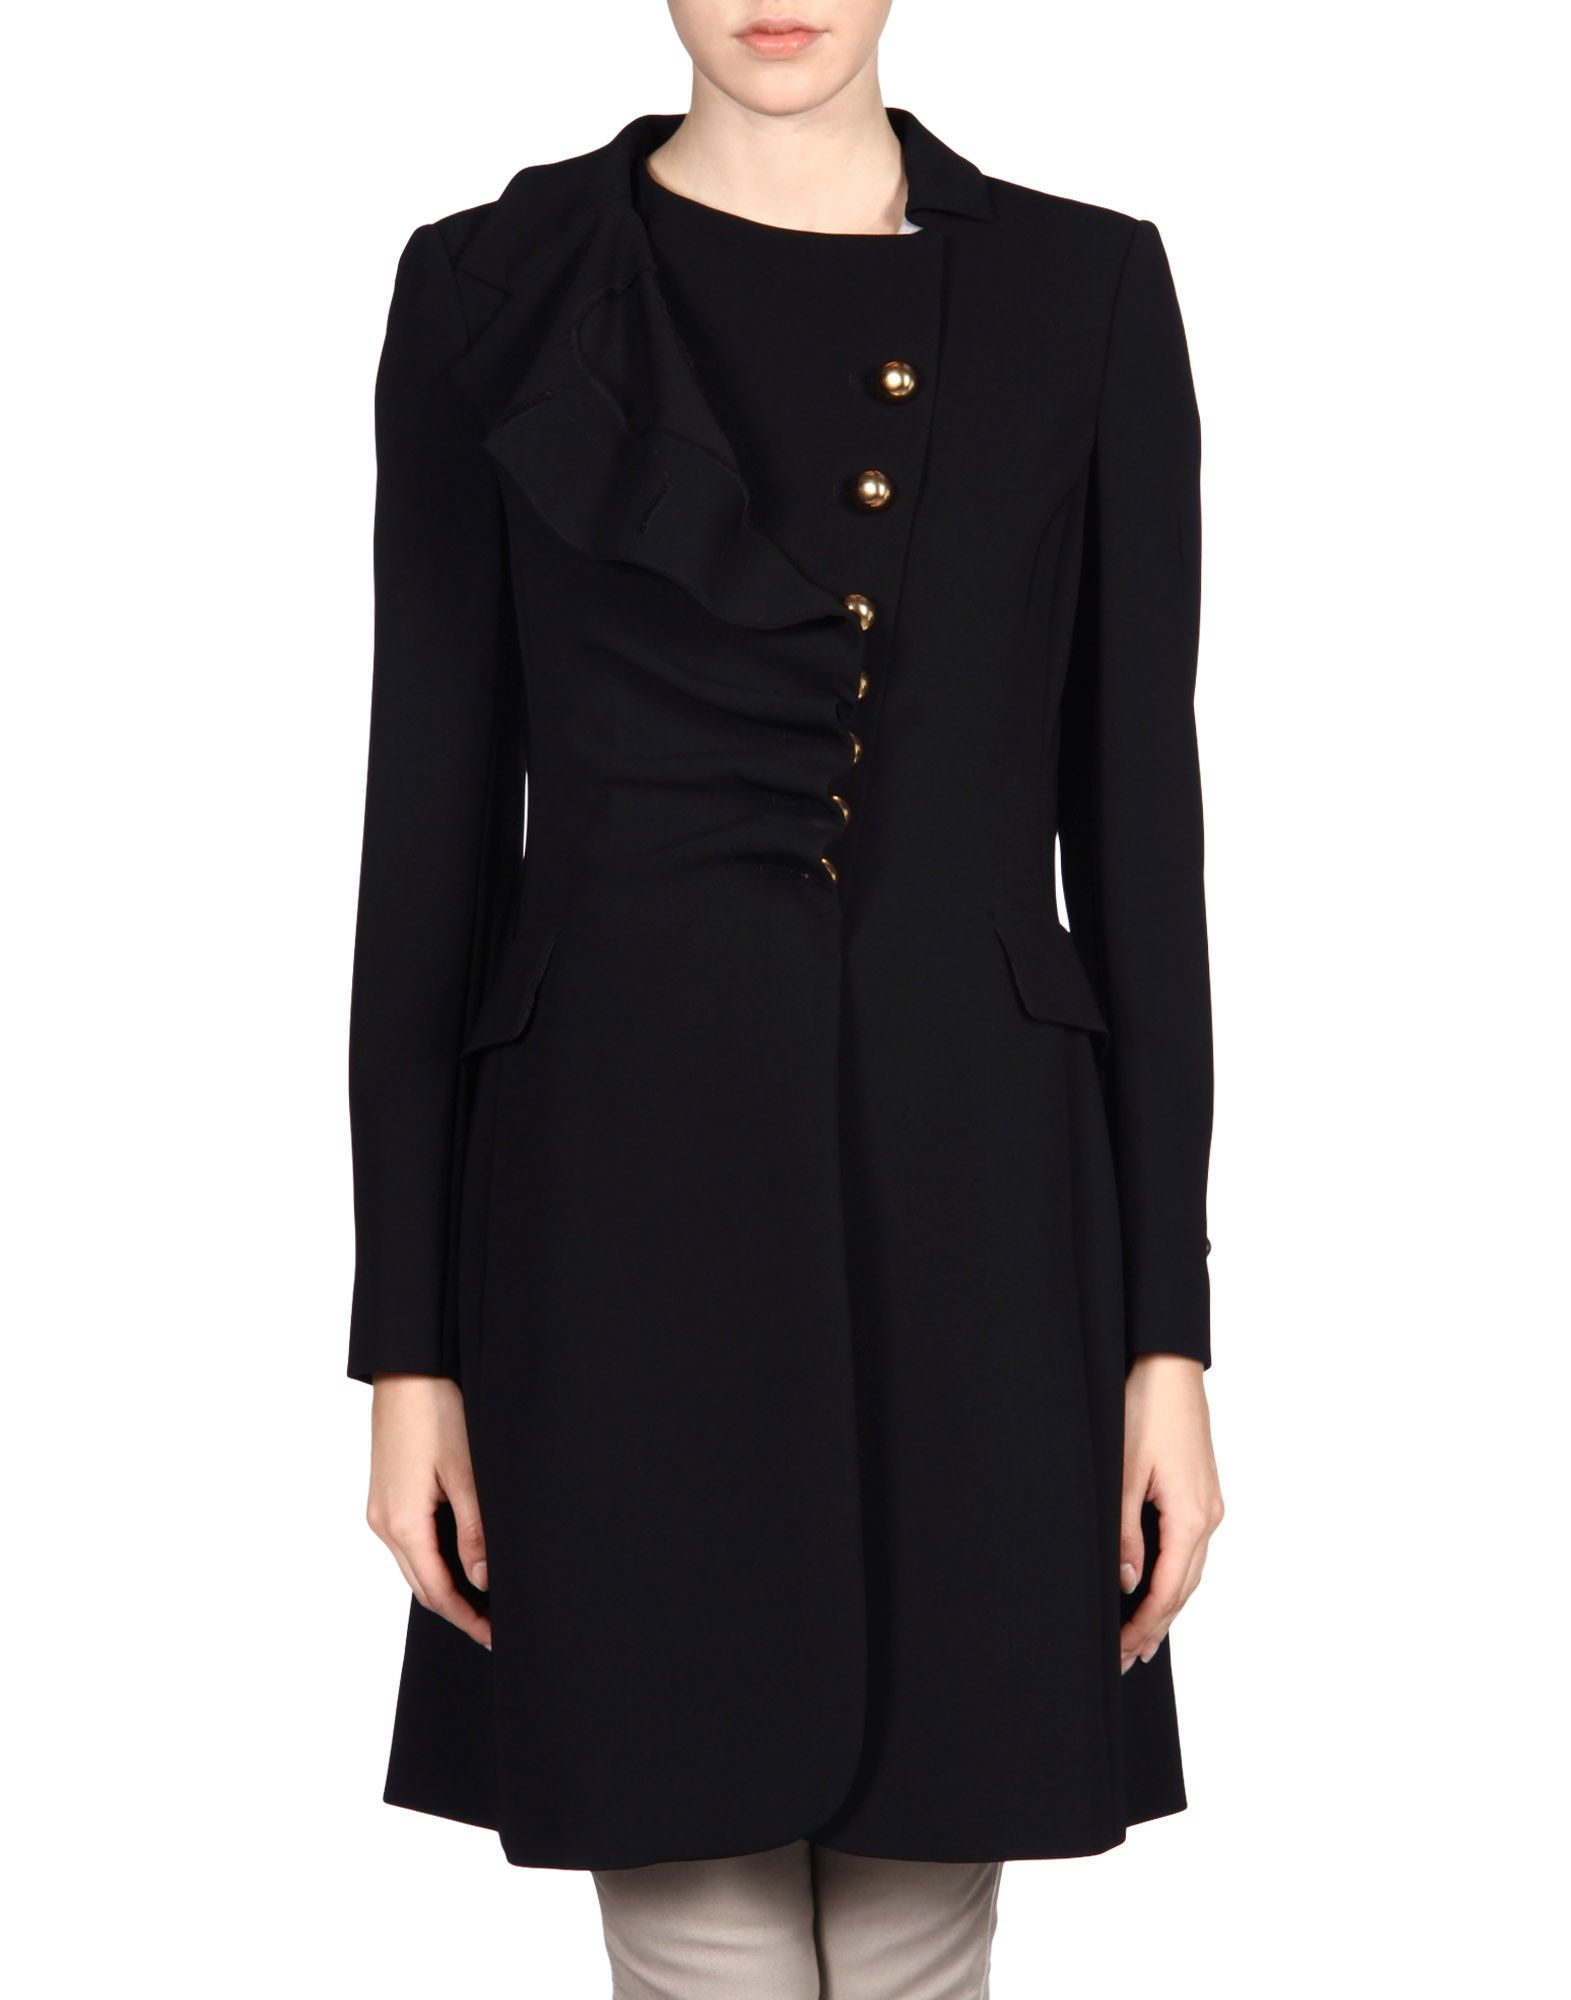 Moschino Full-length Jacket in Black | Lyst